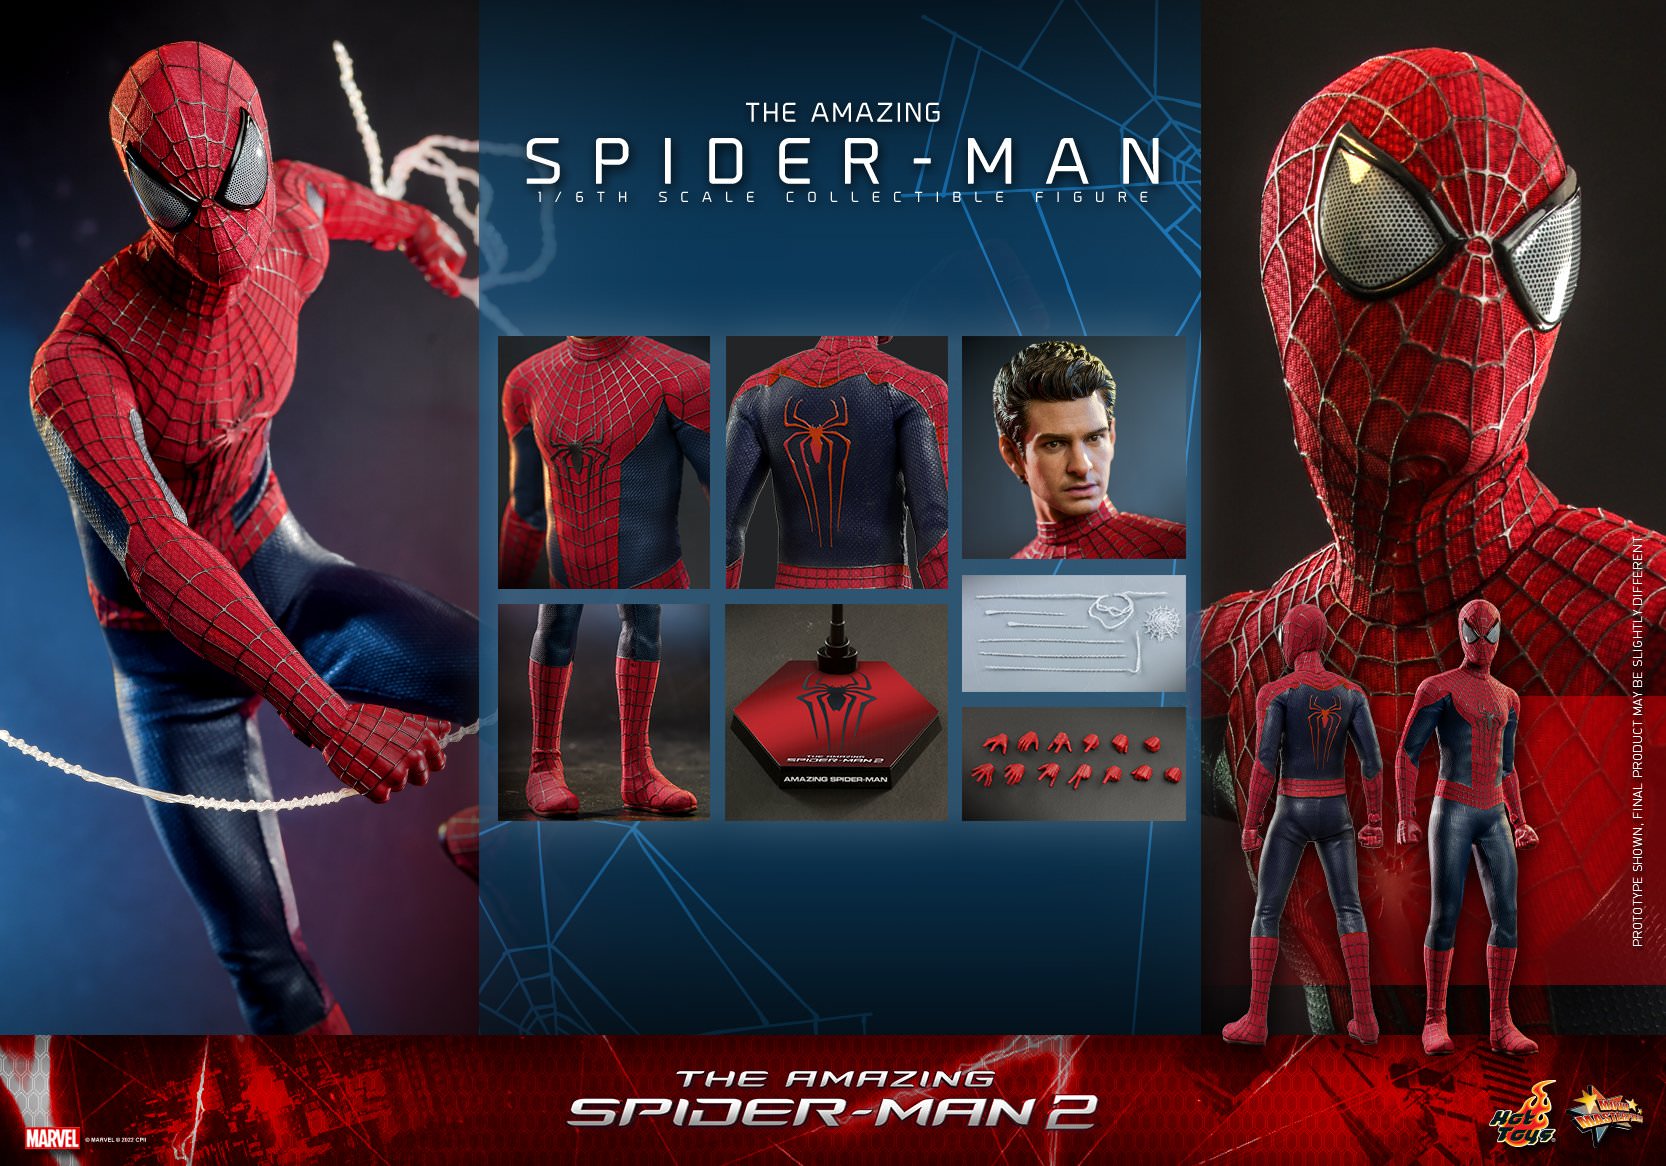 The Amazing Spider-Man: Andrew Garfield: The Amazing Spider-Man 2: Marvel: Hot Toys